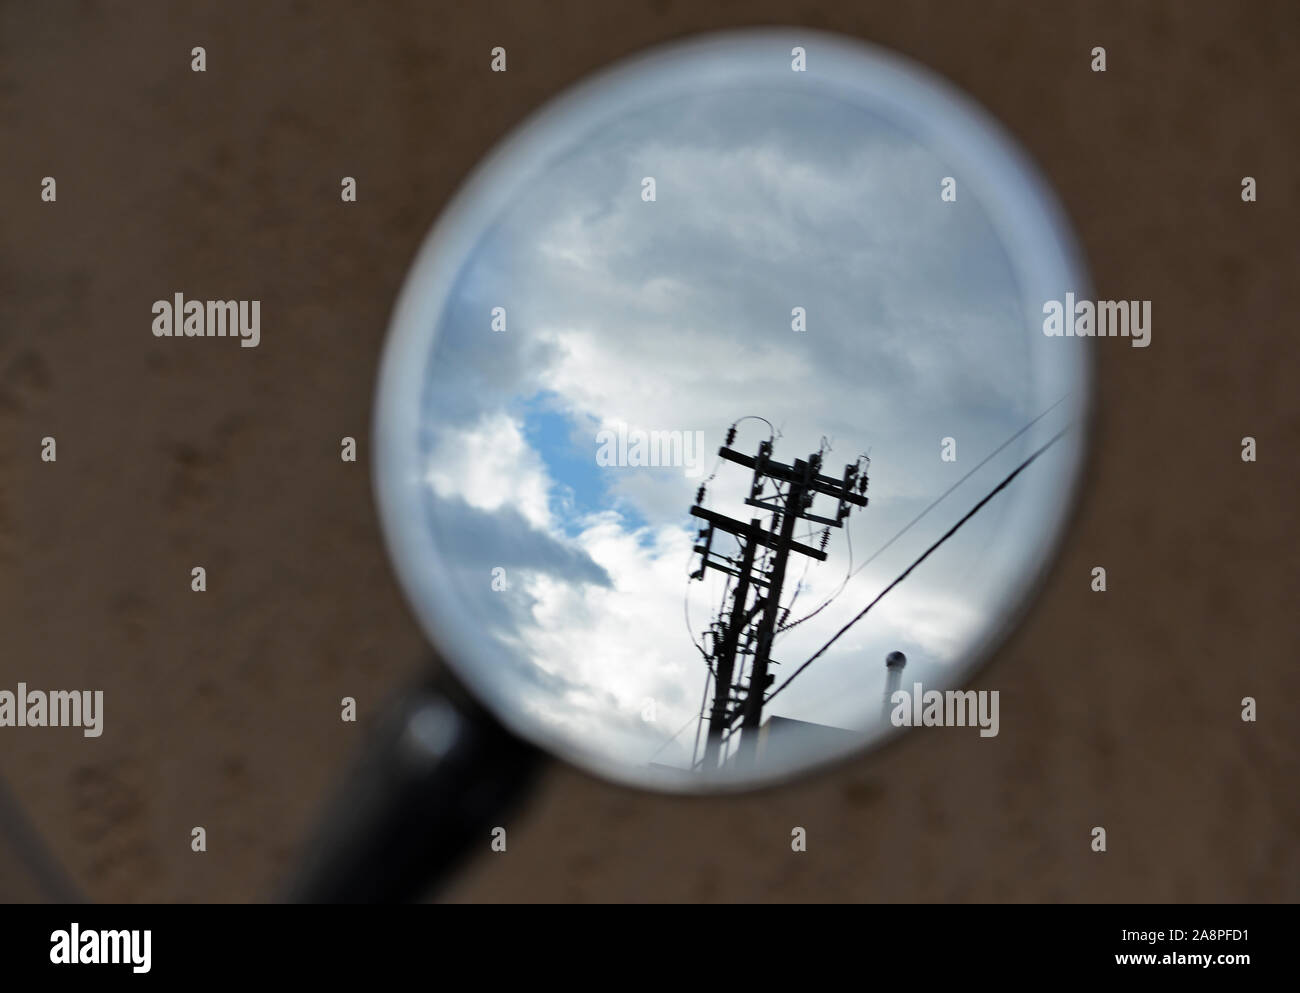 Electricity pylon as seen through the mirror of a motorbike. Concept : Electricity consumption & production. Stock Photo